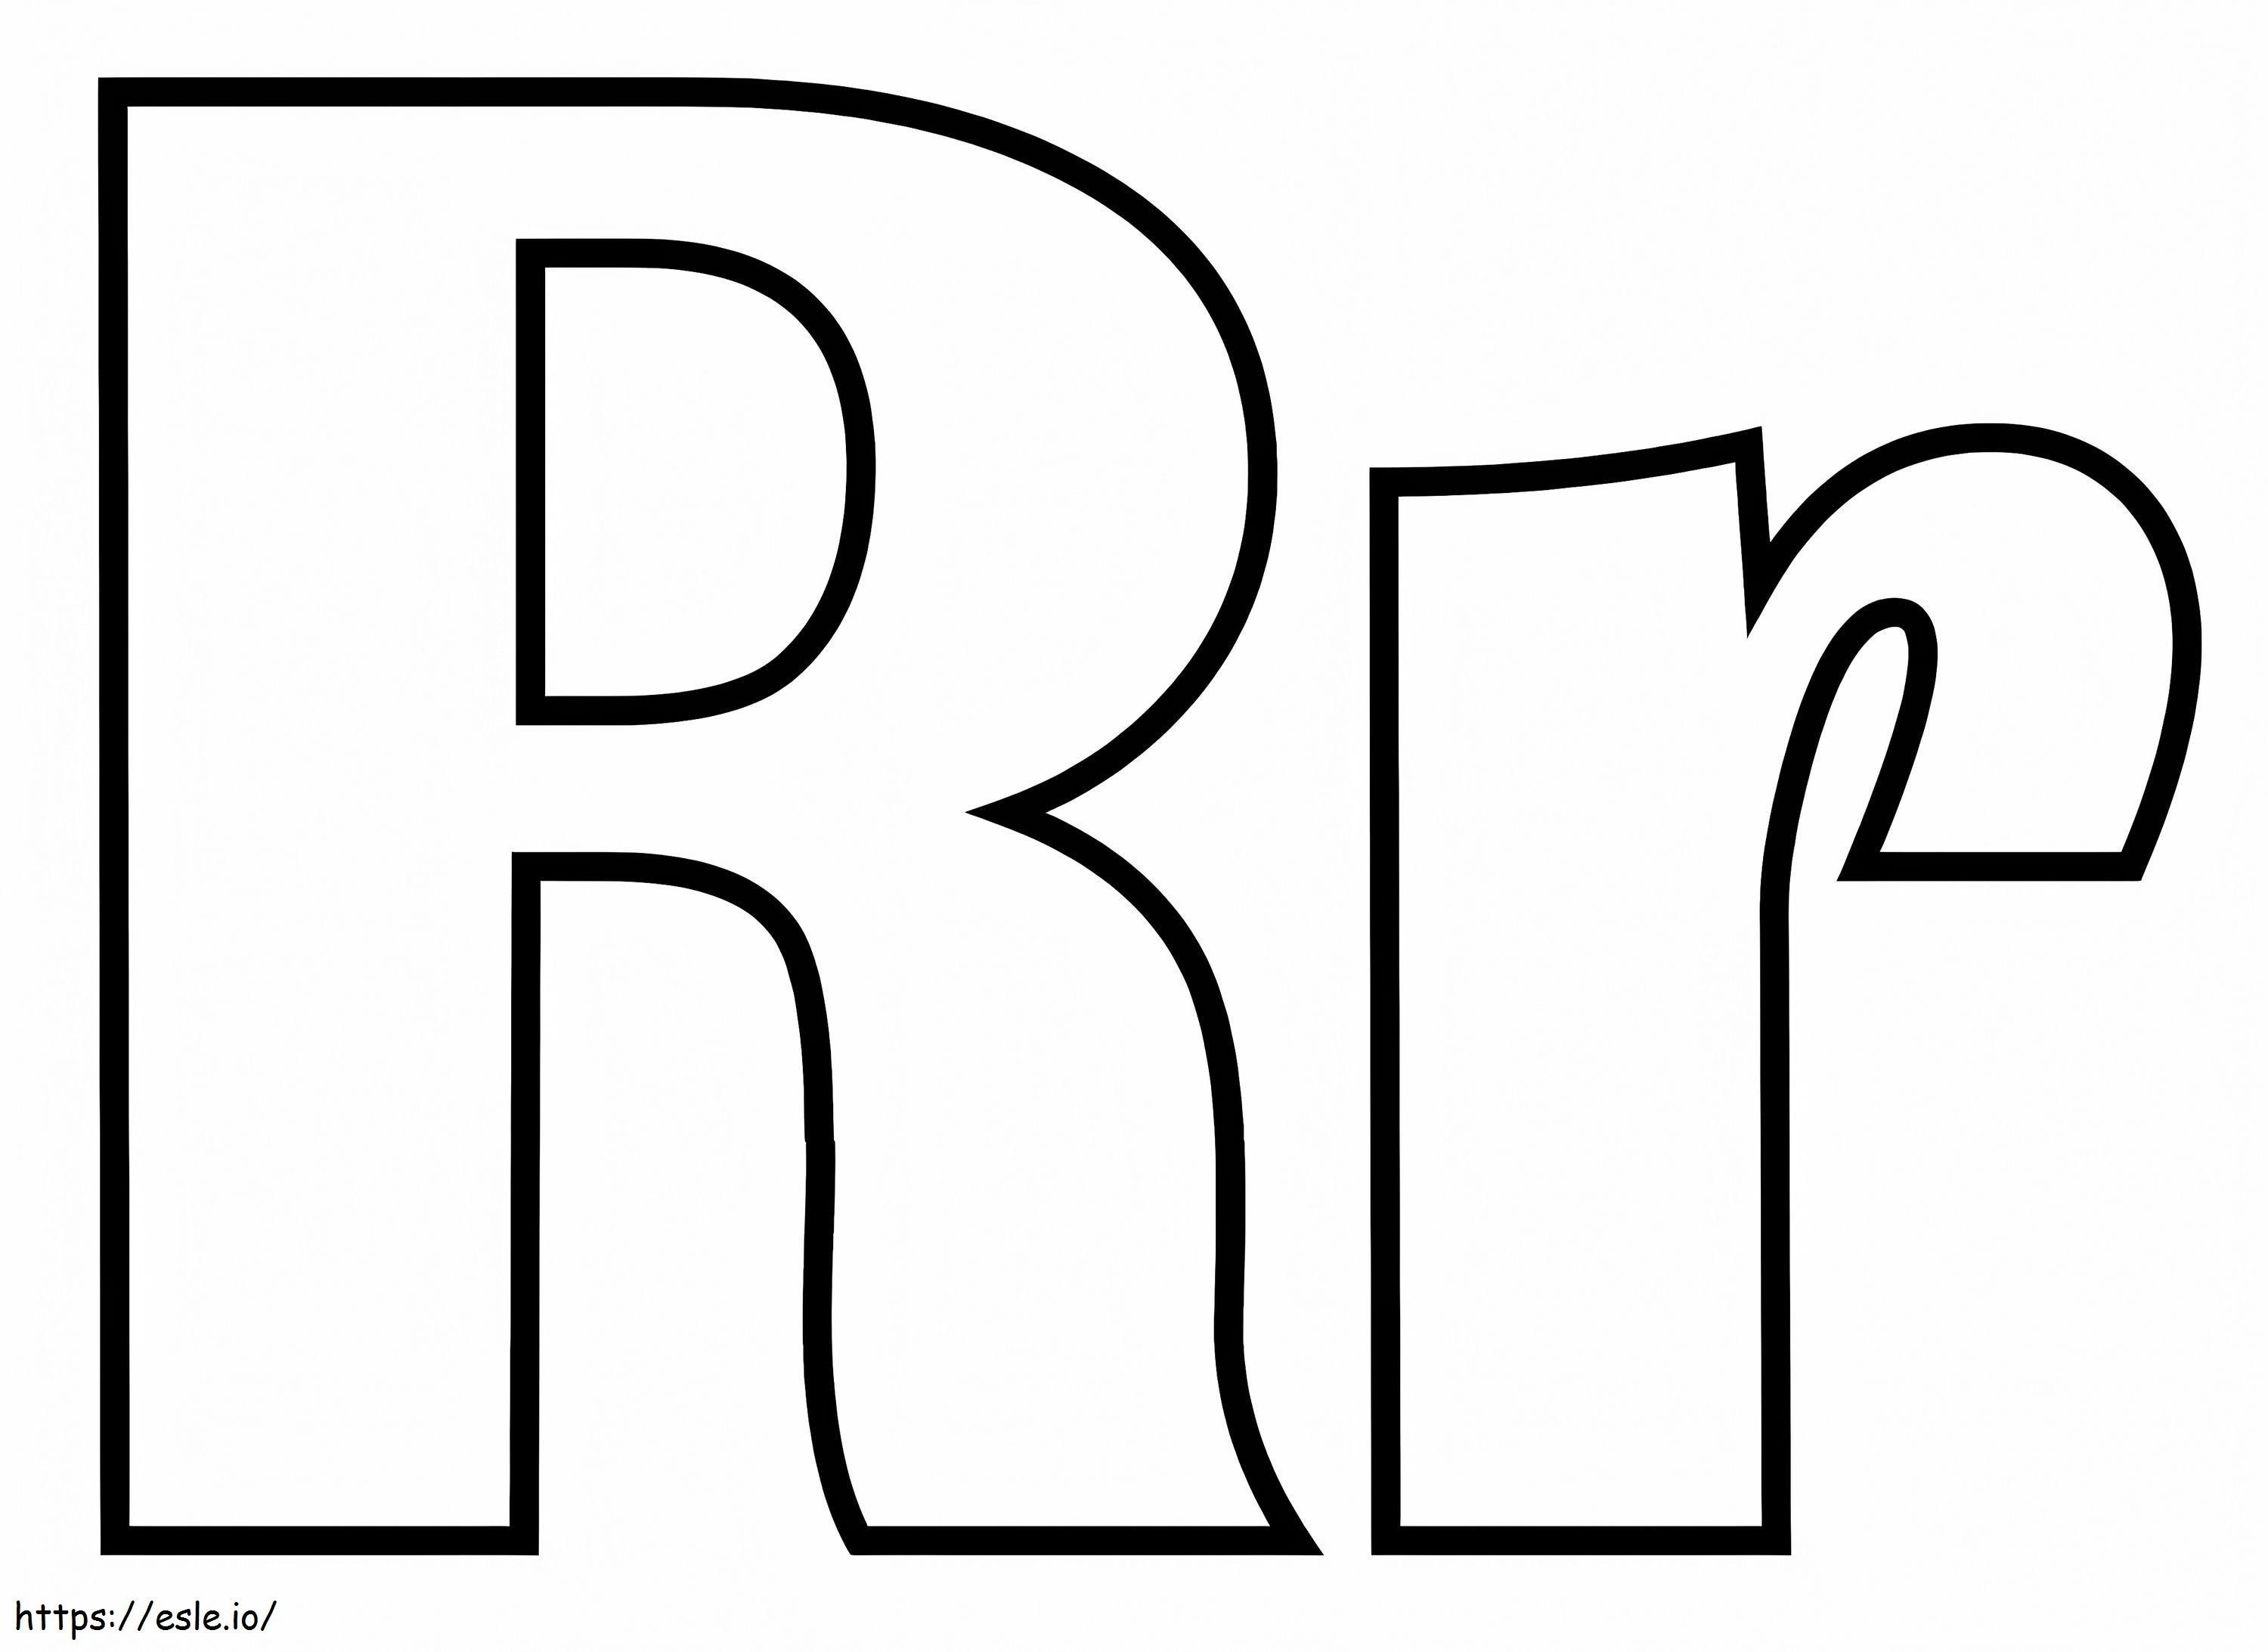 Letter R 2 coloring page